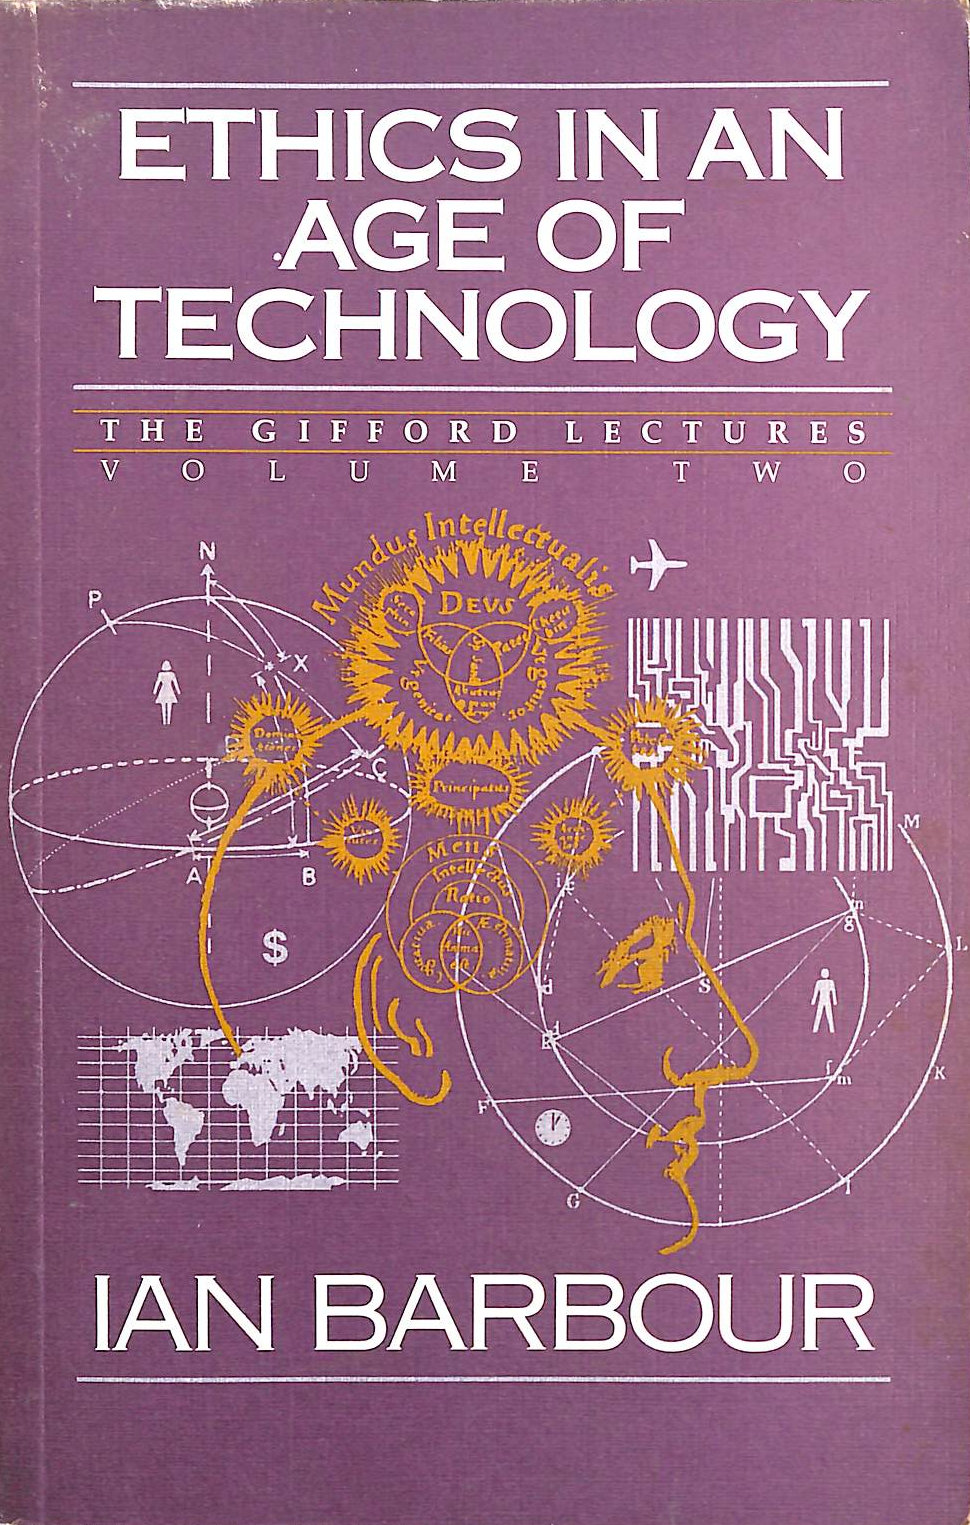 BARBOUR, IAN G. - Ethics in an Age of Technology: The Gifford Lectures 1989-1991: Volume 2